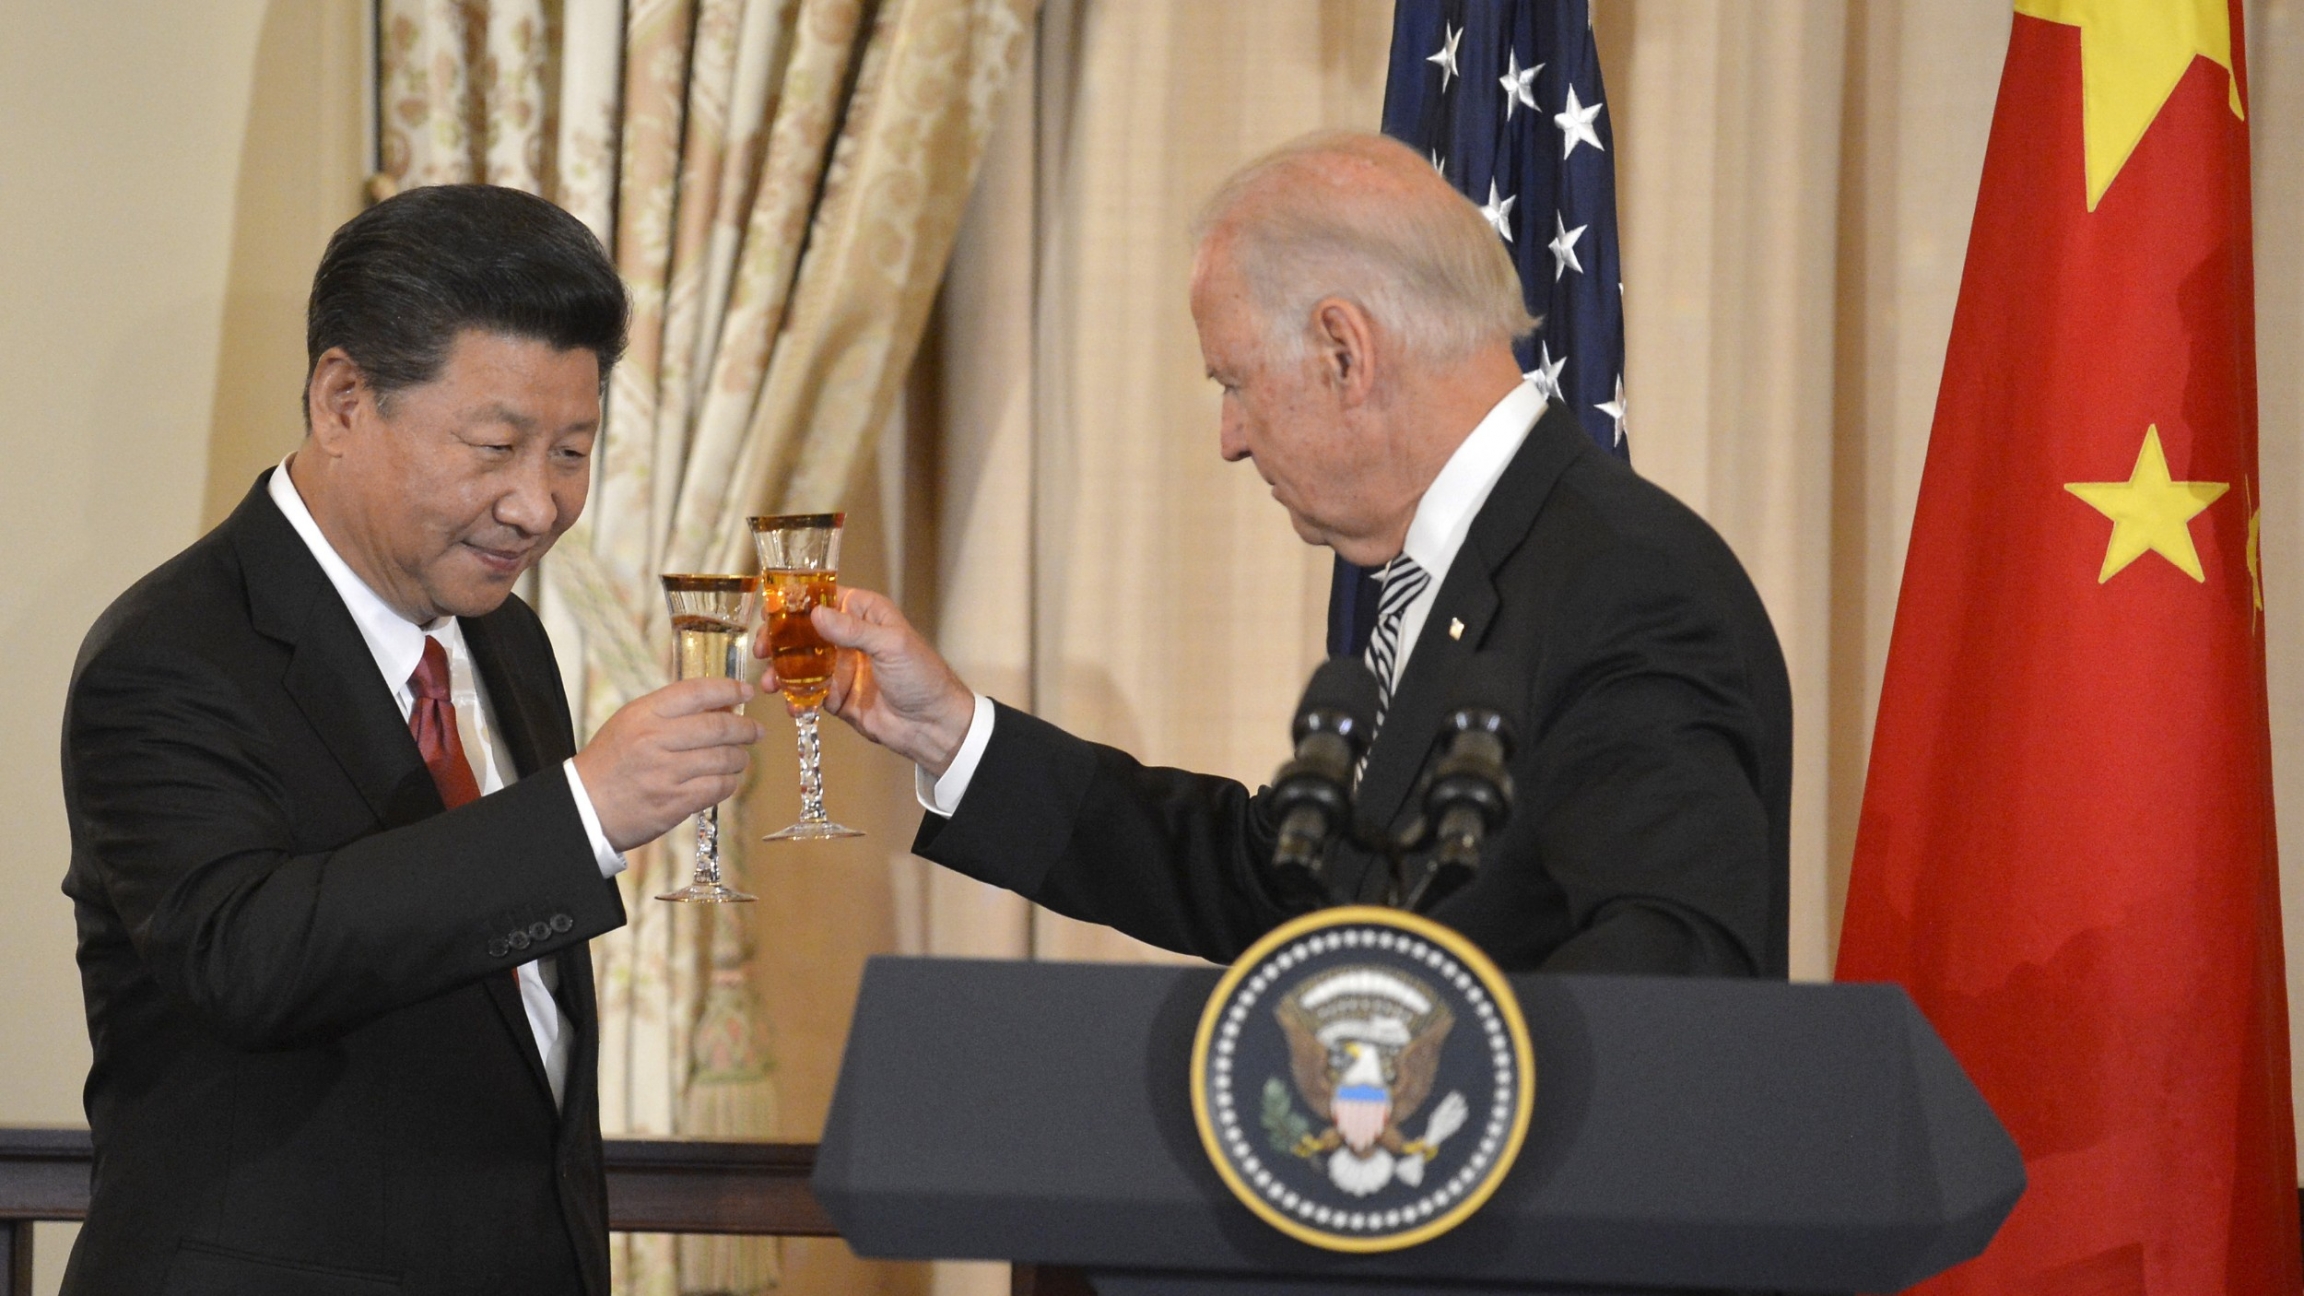 Roving Periscope: In 1st call, Biden ‘clashes’ with Xi Jinping